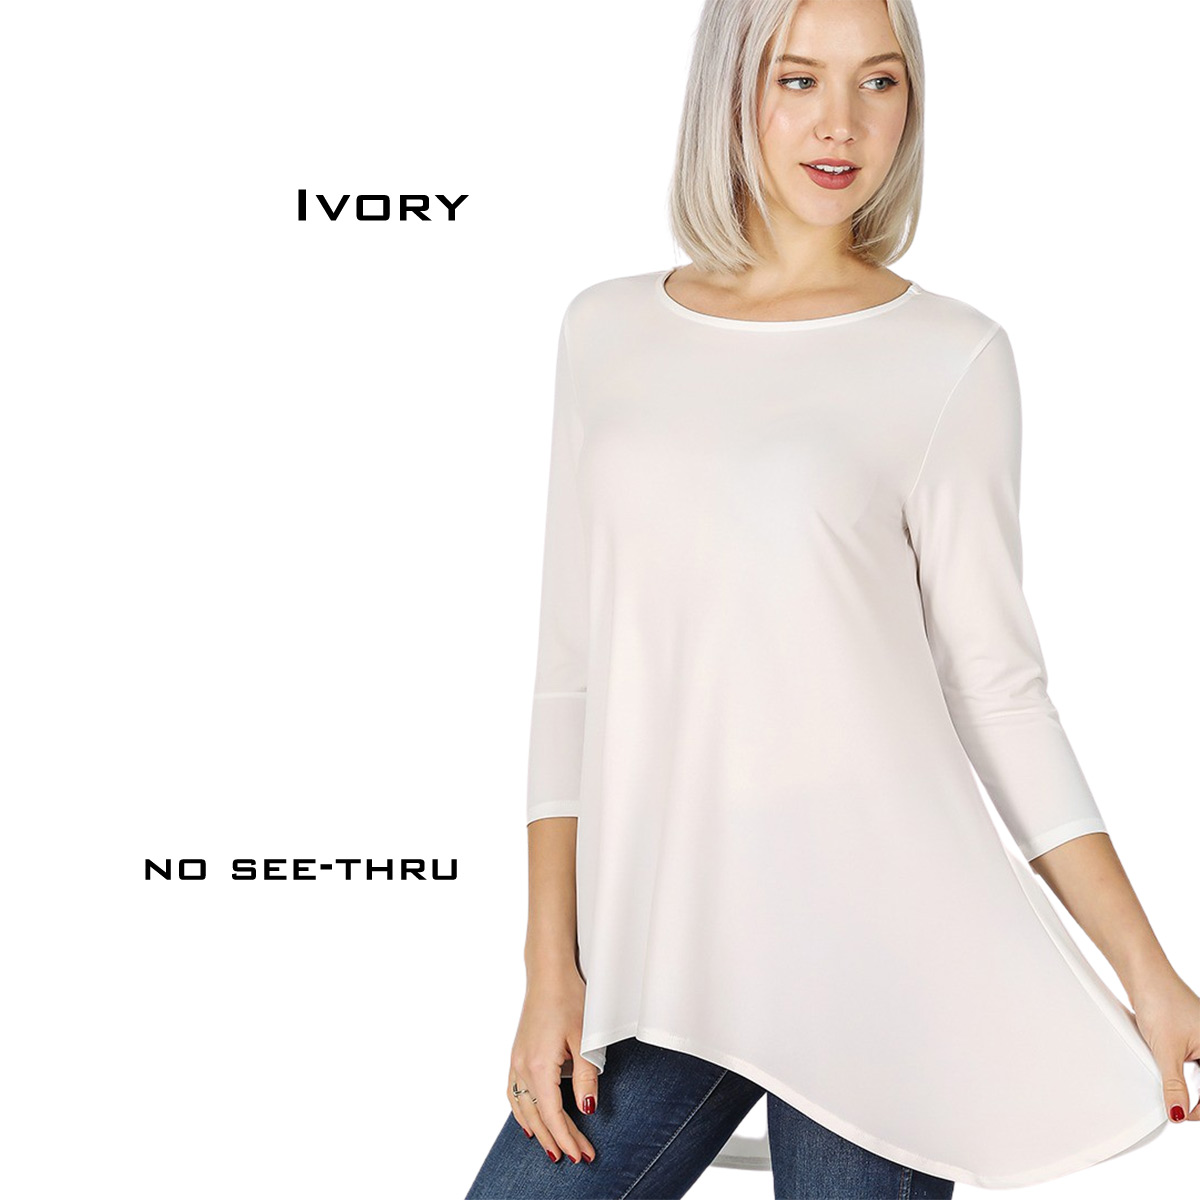 2367 - Ity High-Low 3/4 Sleeve Top